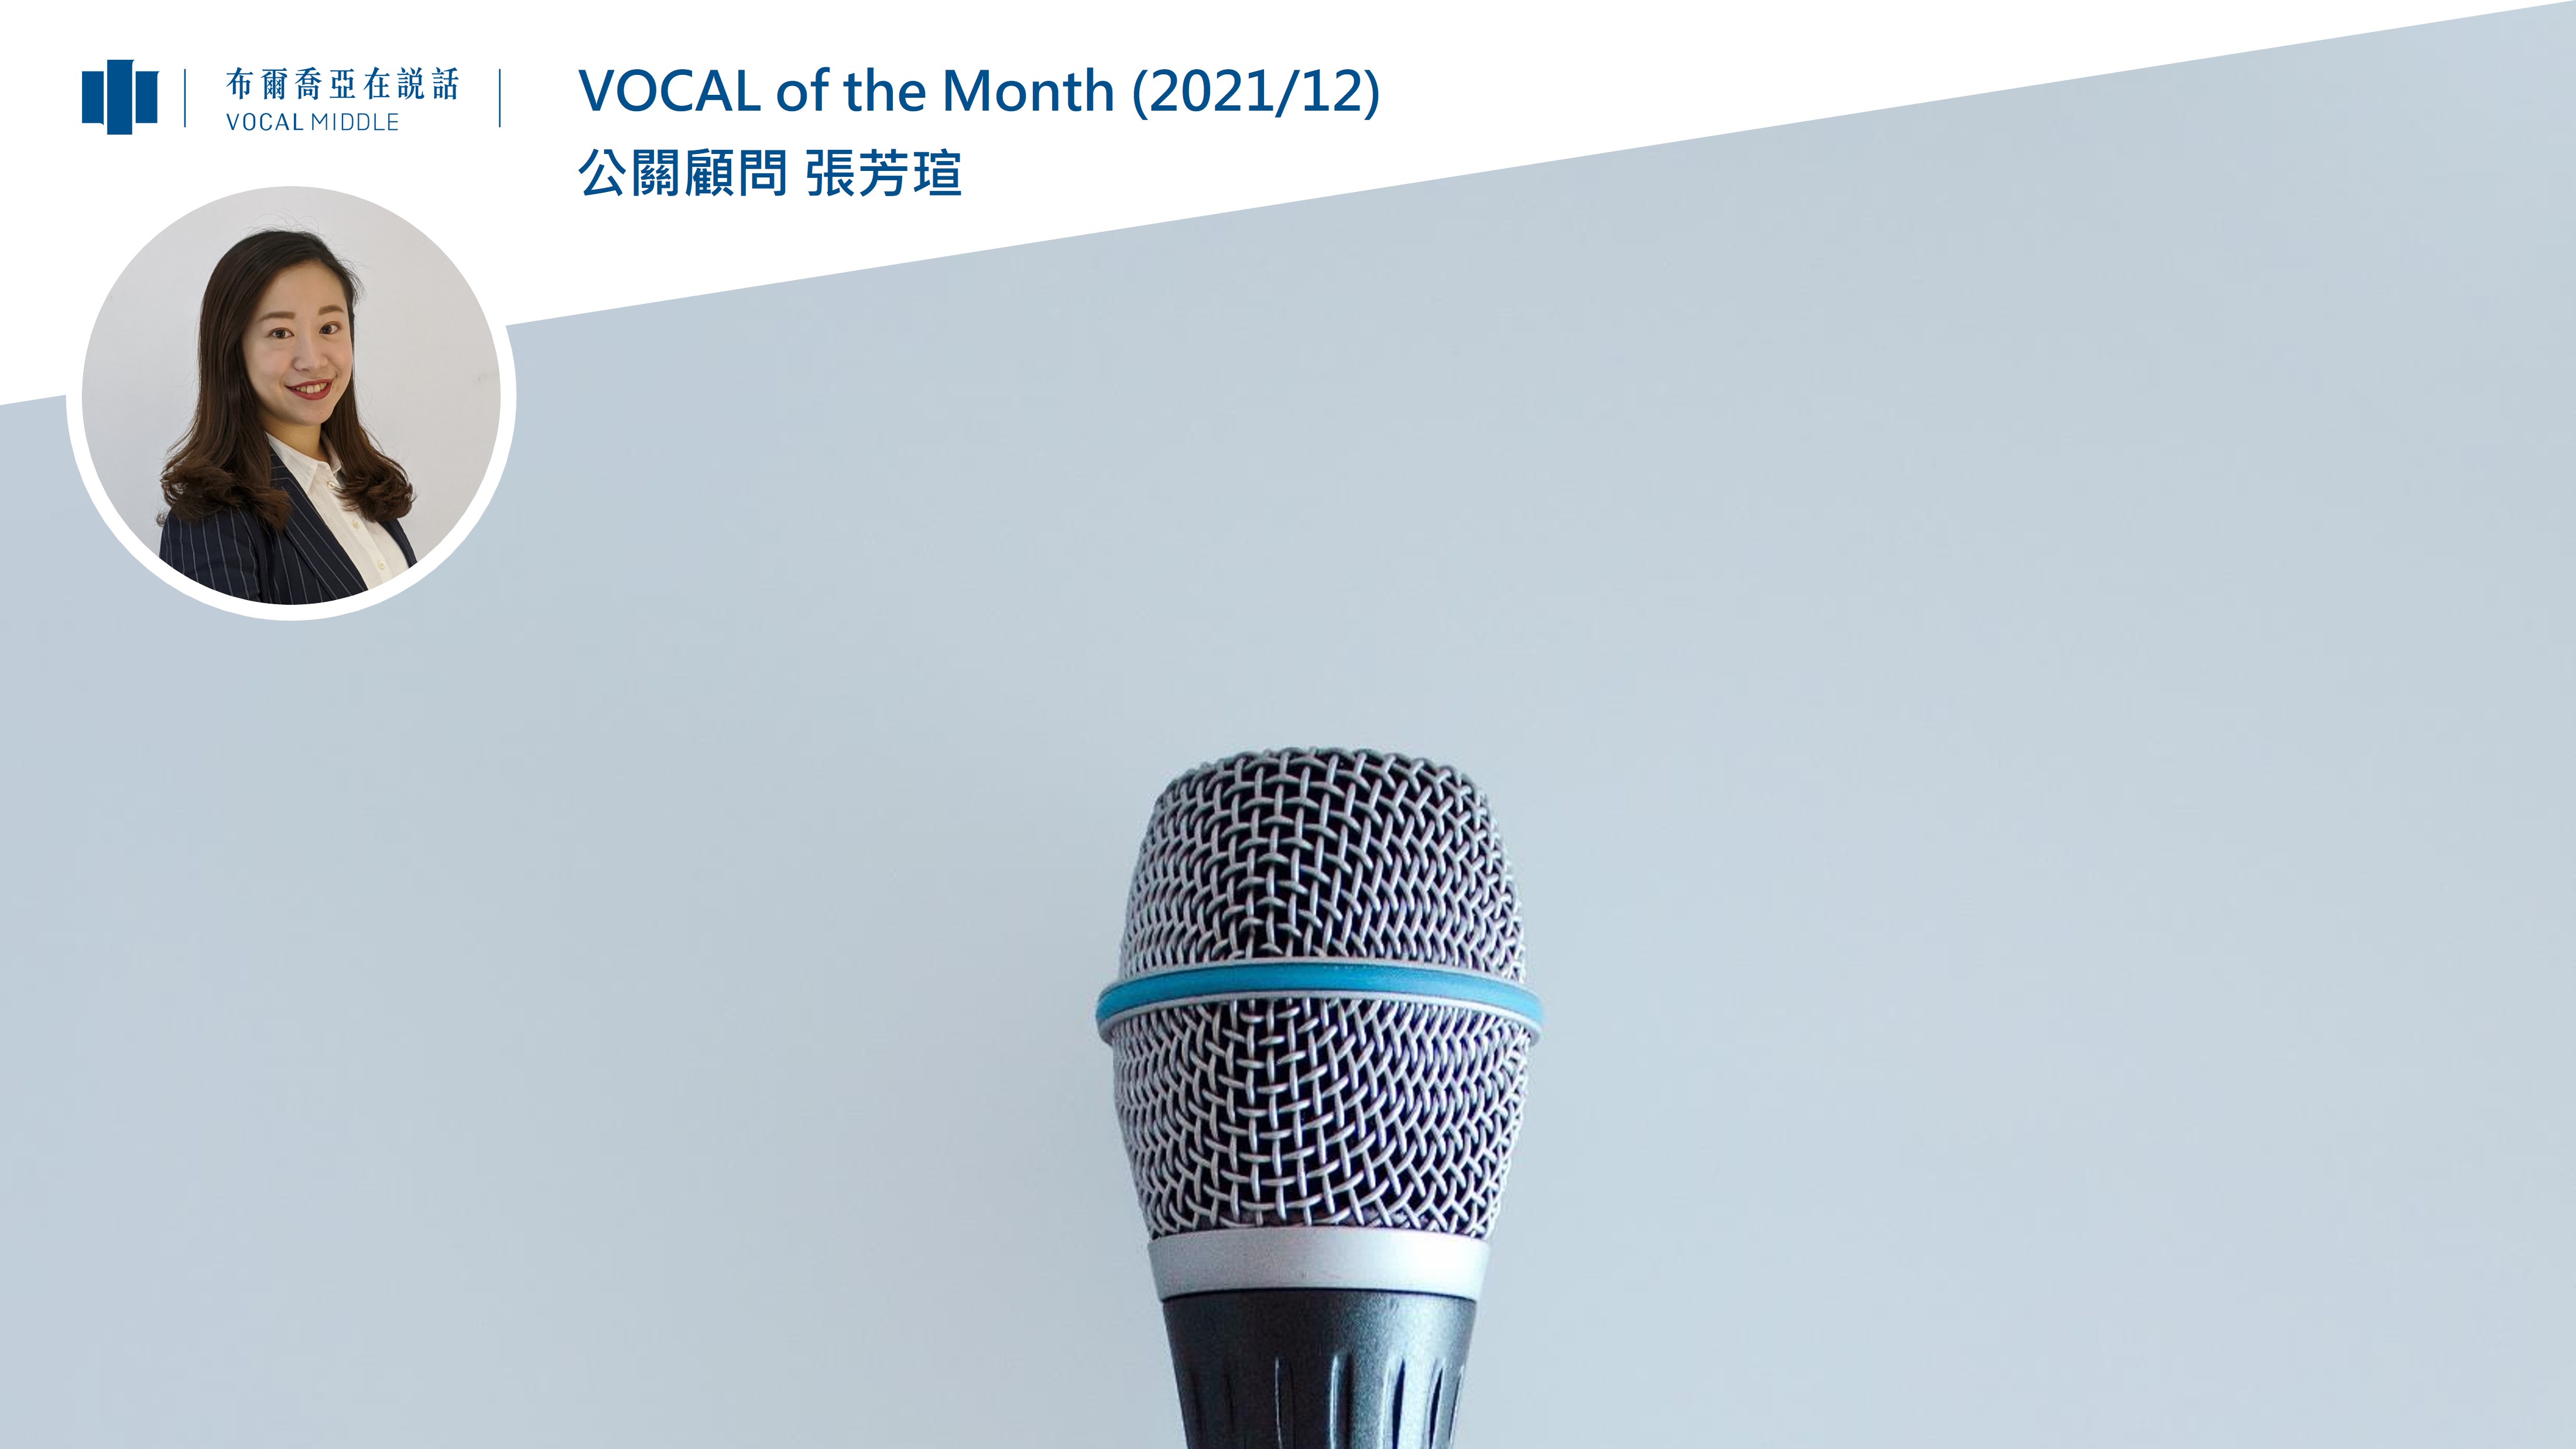 【VOCAL of the Month】衝刺2021尾聲！Be Bold、Be Generous、Be Proud、Be One VOCAL MIDDLE！(2021/12)